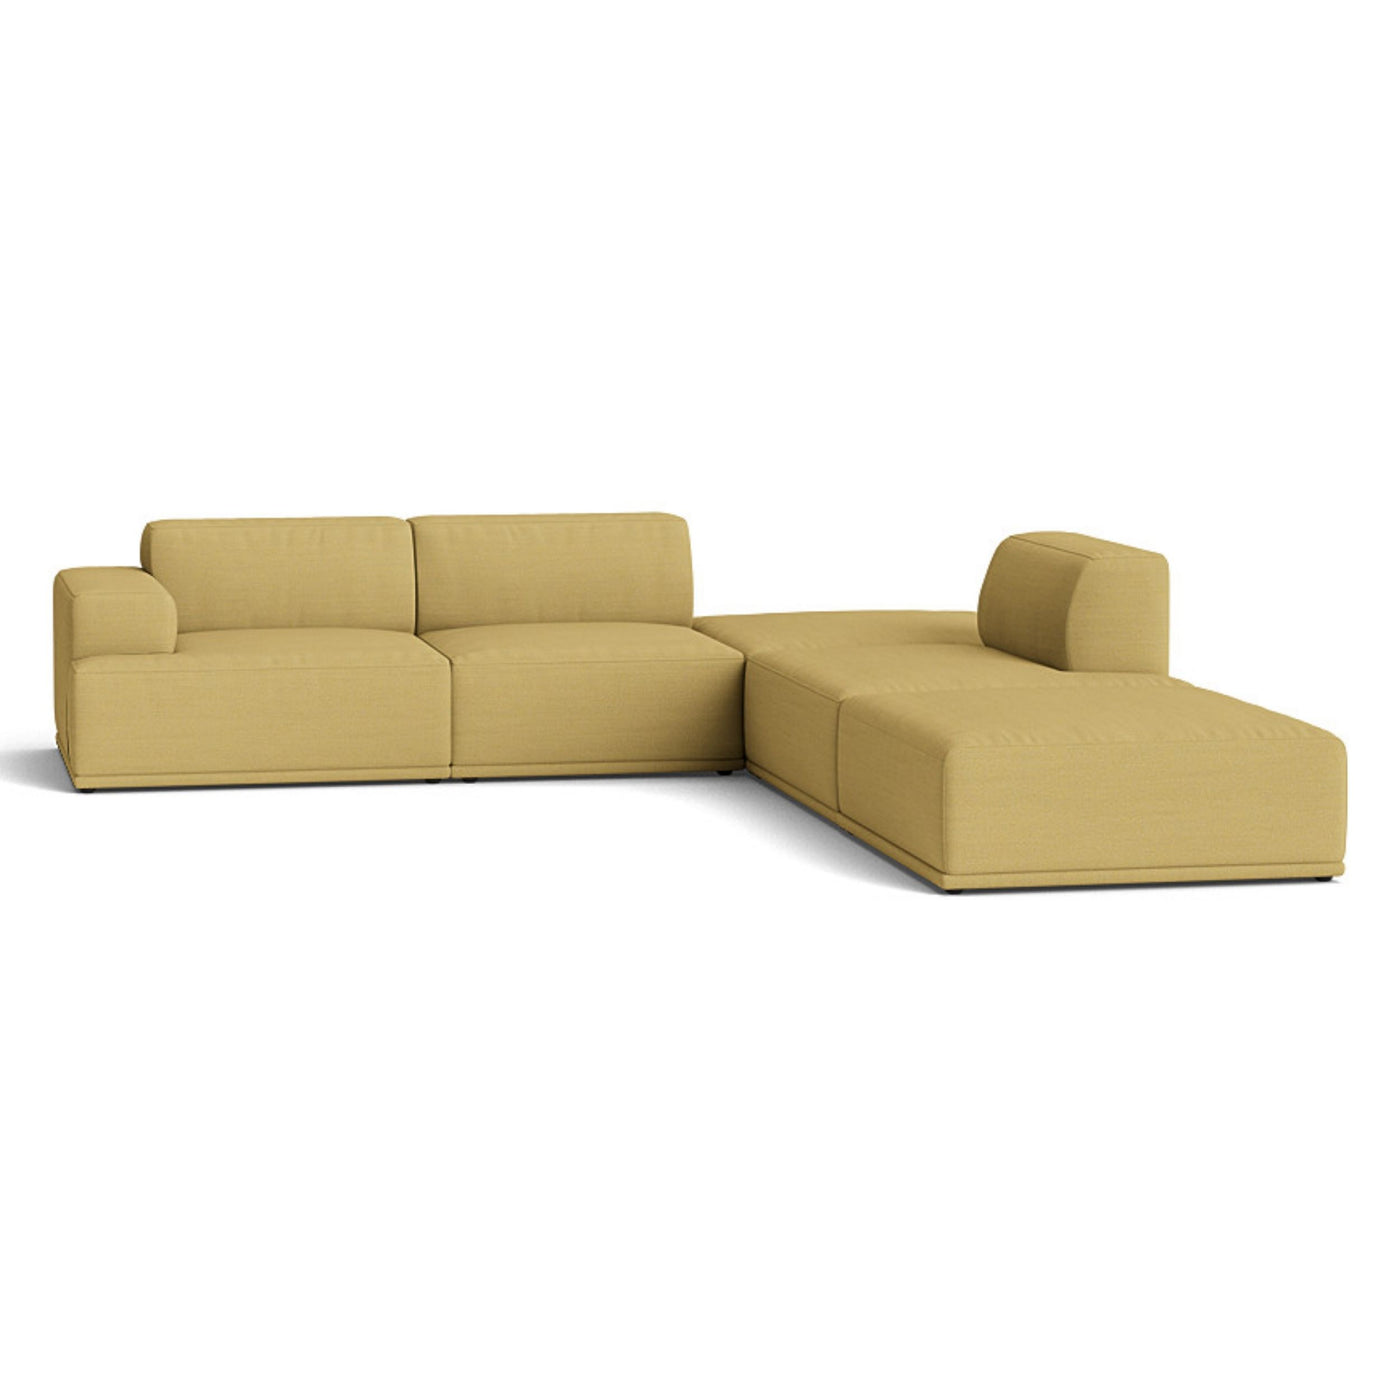 Muuto Connect Soft Modular Corner Sofa, configuration 3. made-to-order from someday designs. #colour_hallingdal-407